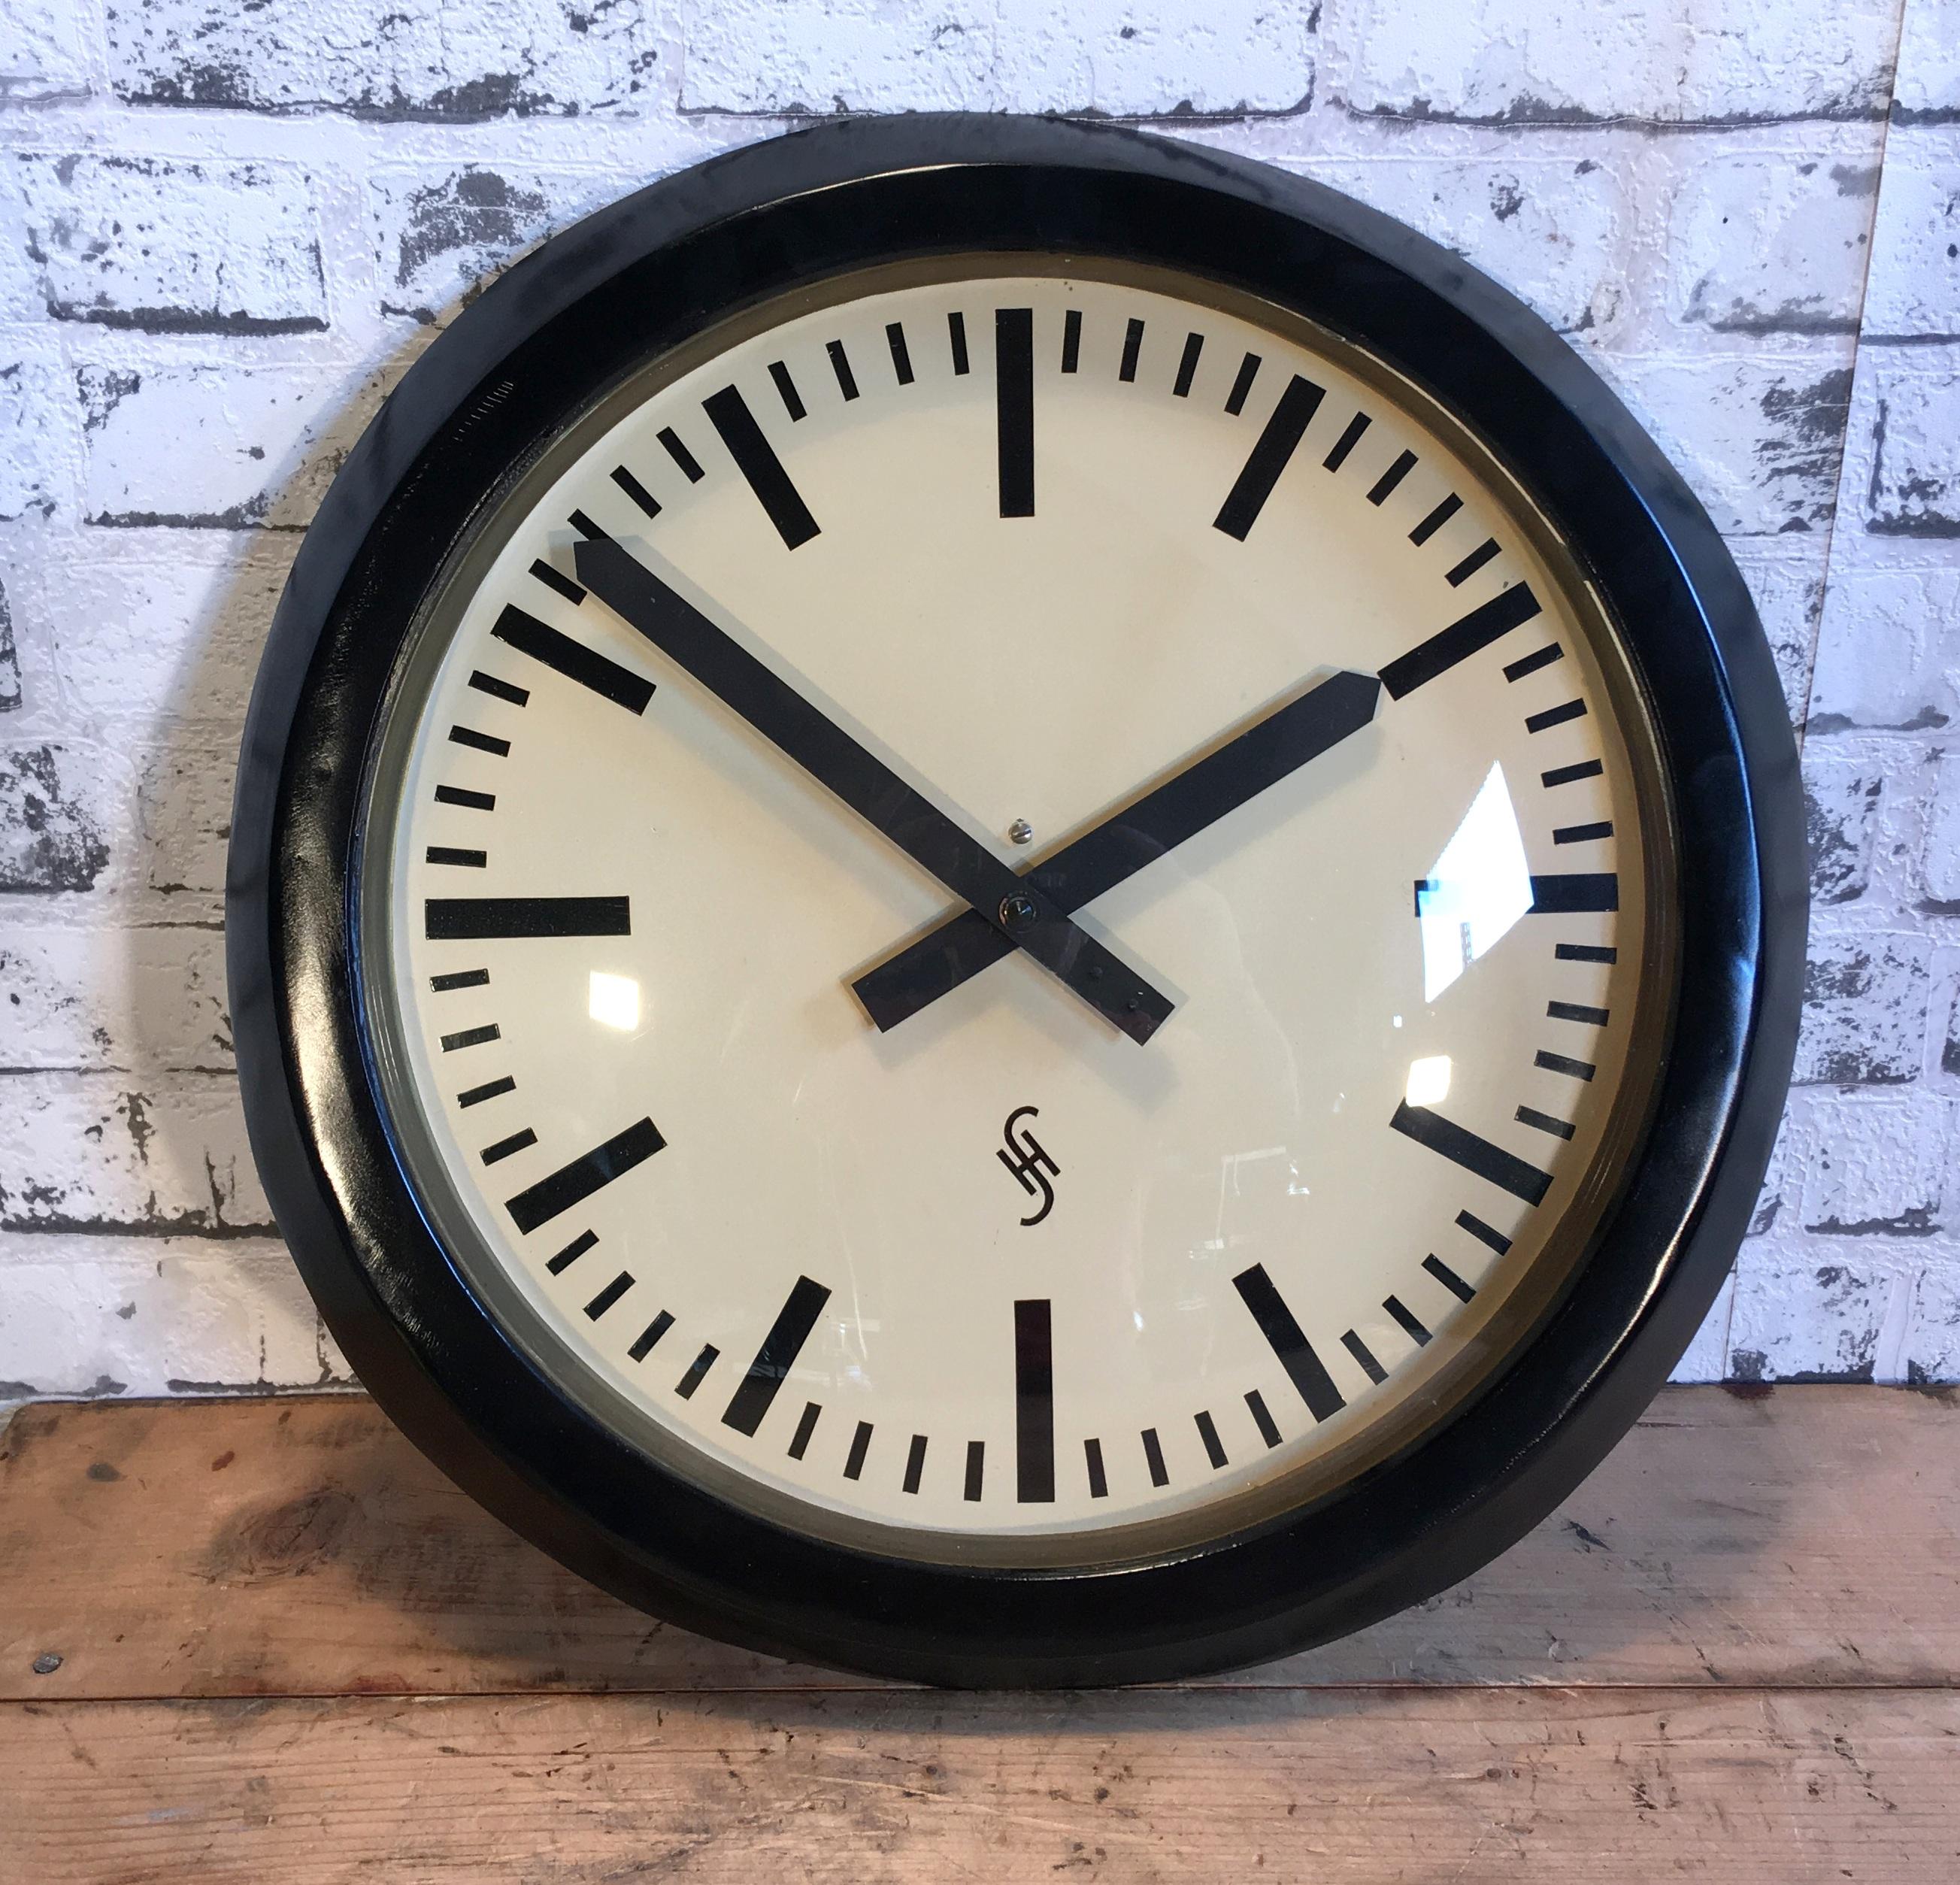 This large wall clock was produced by Siemens Halske in Germany during the 1950s.It features a black metal frame, aluminium dial and clear curved glass cover. The piece has been converted into a battery-powered clockwork and requires only one